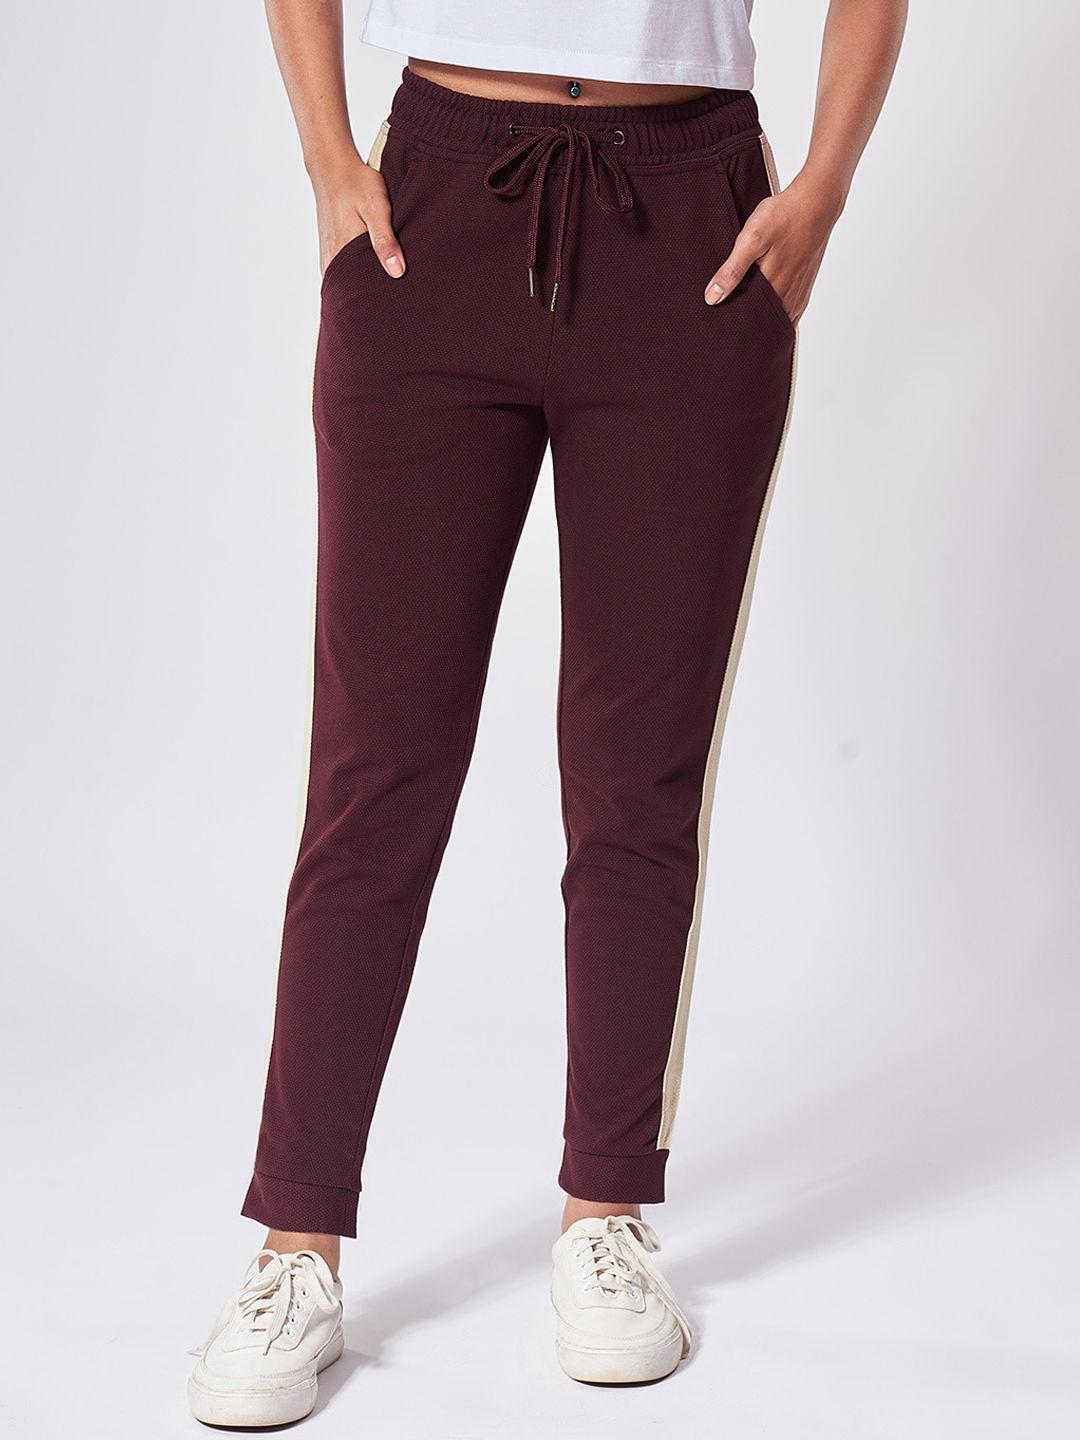 the souled store women burgundy track pants